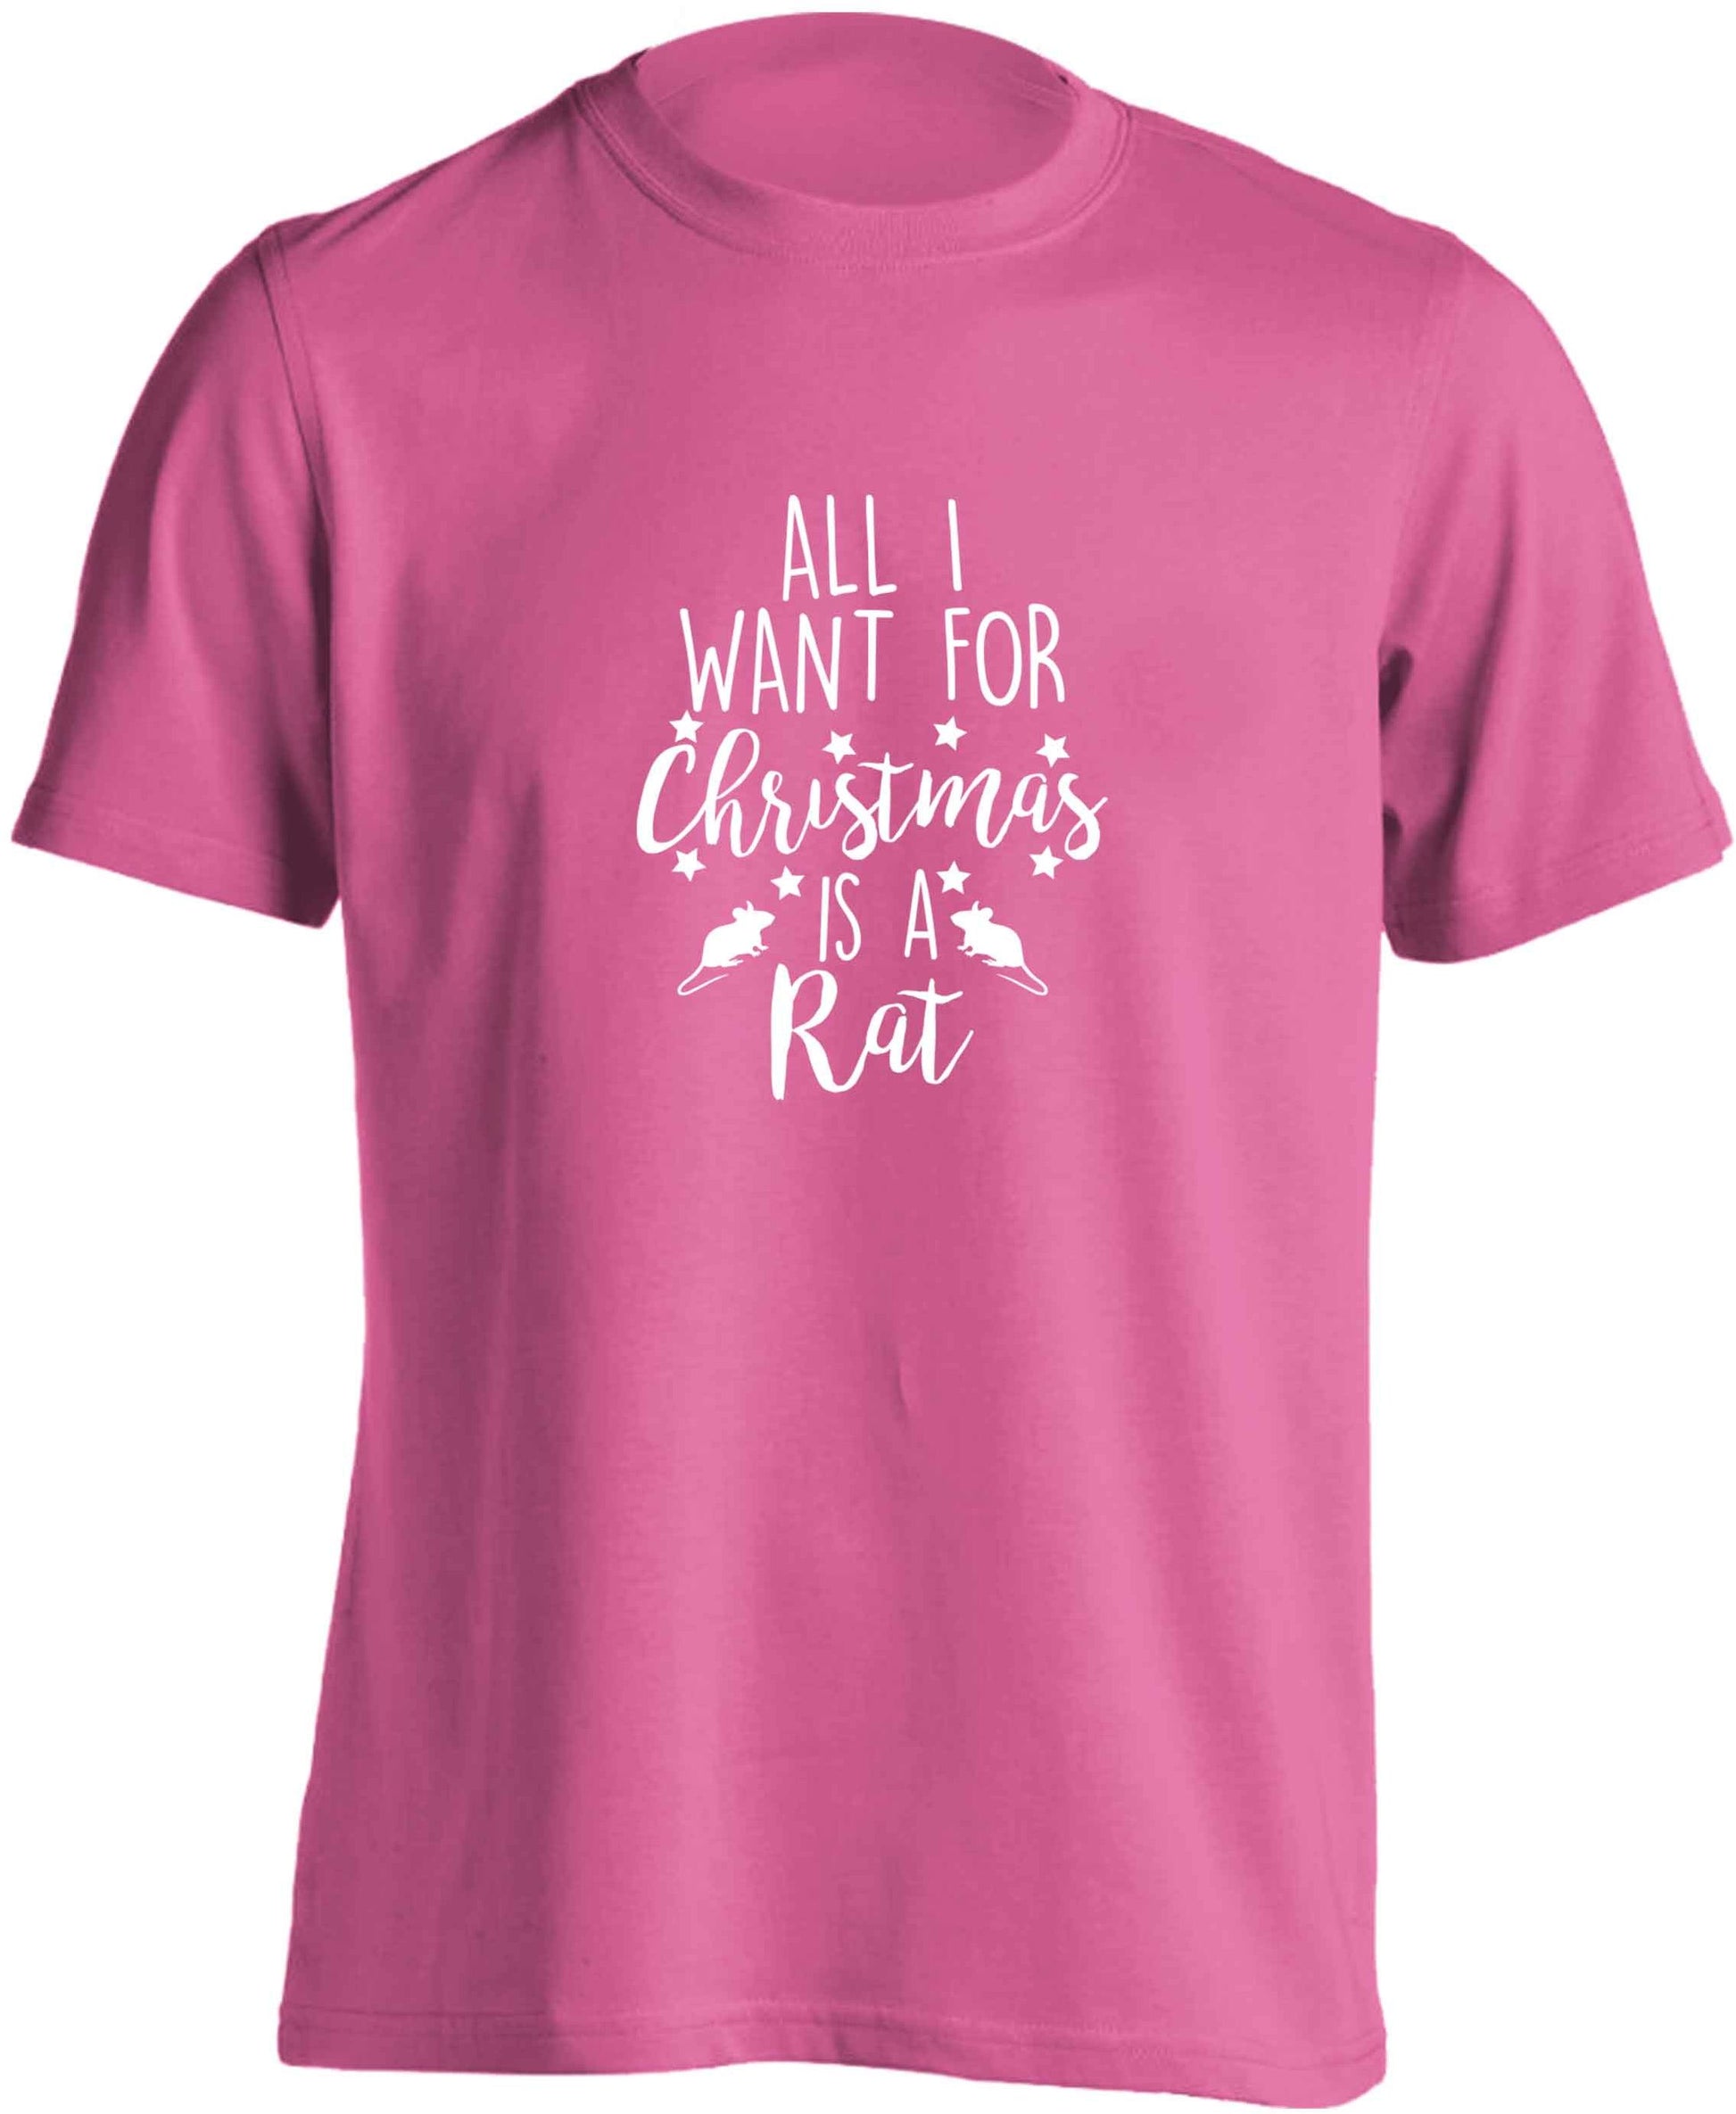 All I want for Christmas is a rat adults unisex pink Tshirt 2XL